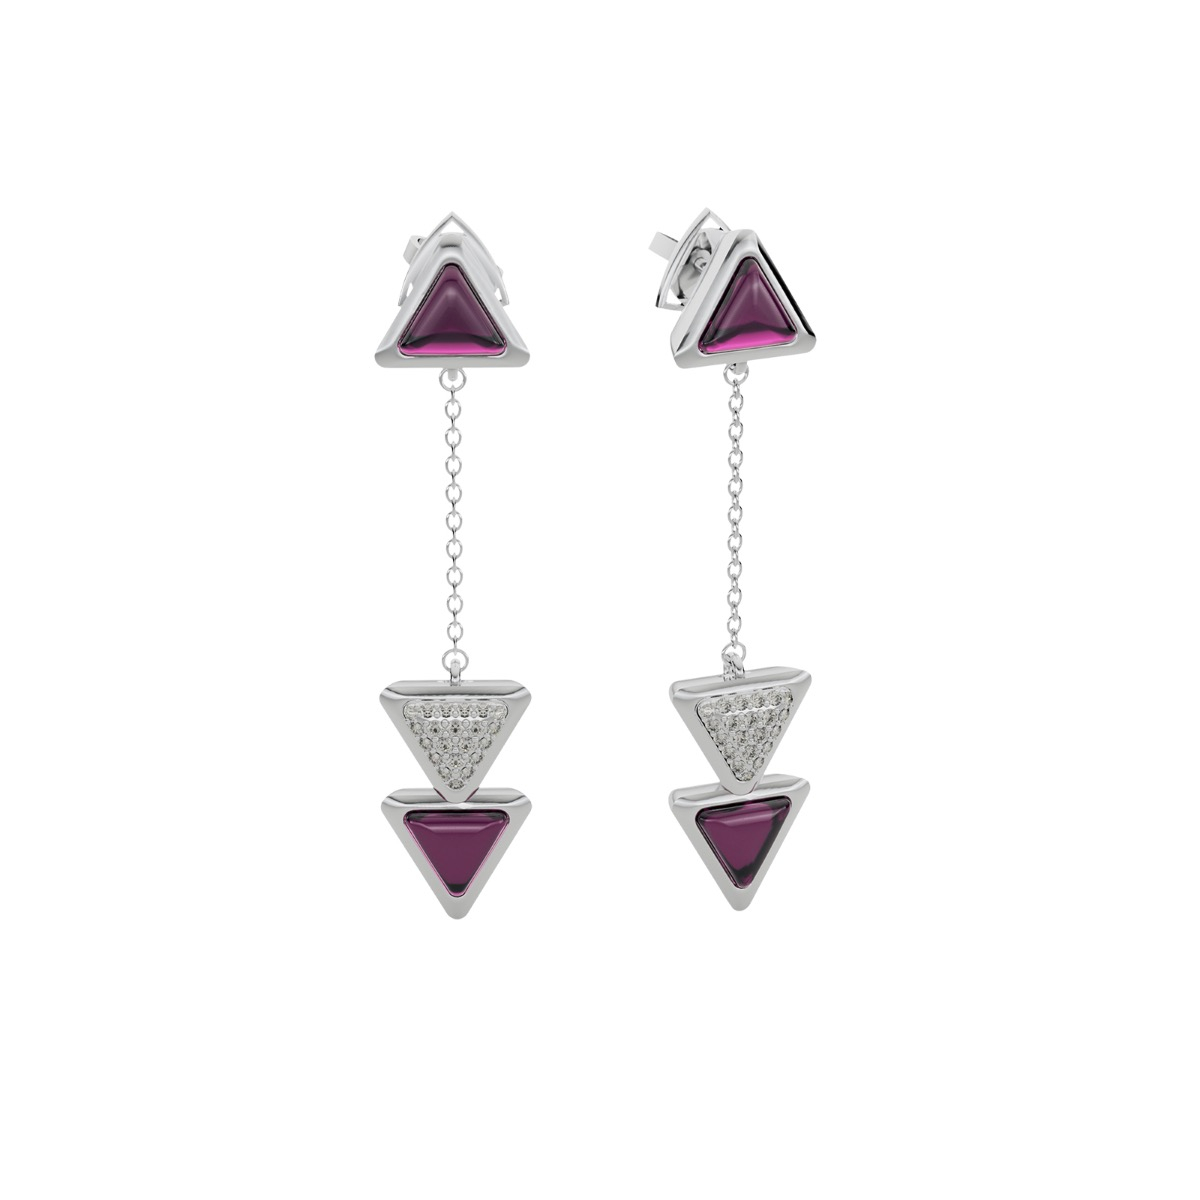 Earrings Dove Vai Rewind Exquisite White Gold Pink Garnet and Diamonds